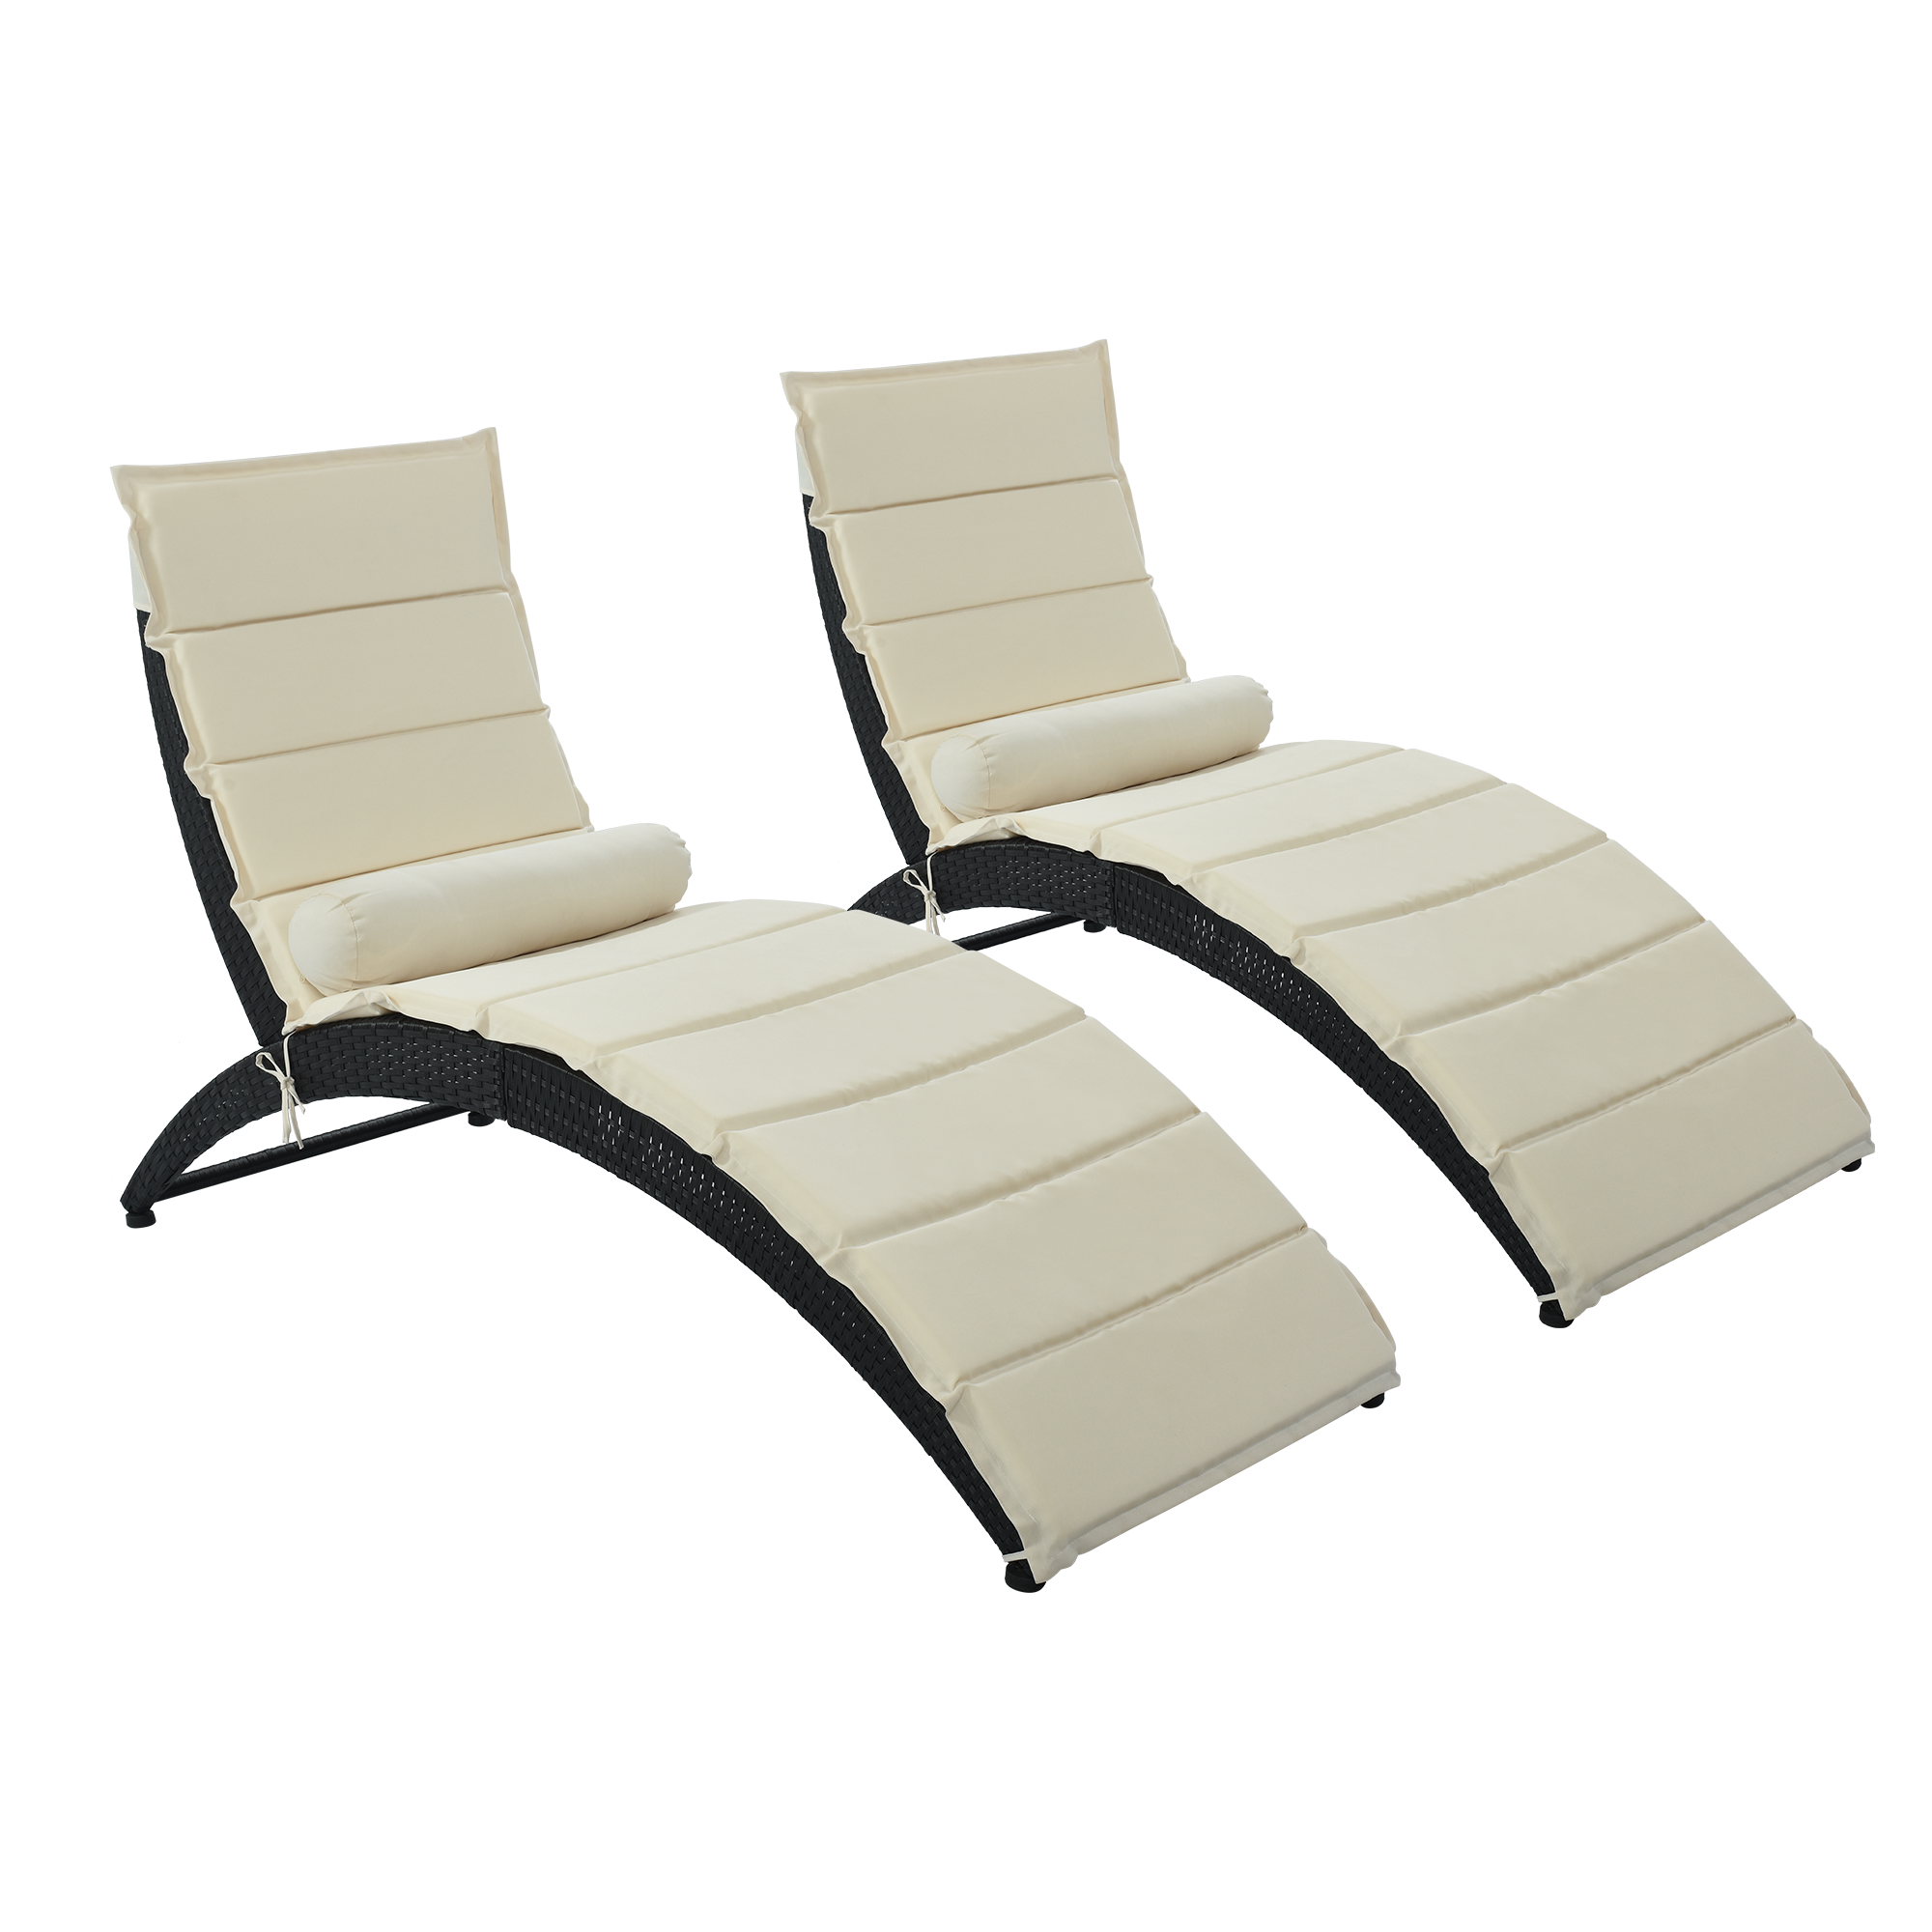 uhomepro 2-Piece Pool Chairs and Lounges, Chaise Lounge Chair Outdoor Set, Patio Loungers Outdoor Furniture Sets Couch Cushioned Recliner Chair with Removable Cushion and Bolster Pillow, Beige - image 5 of 11